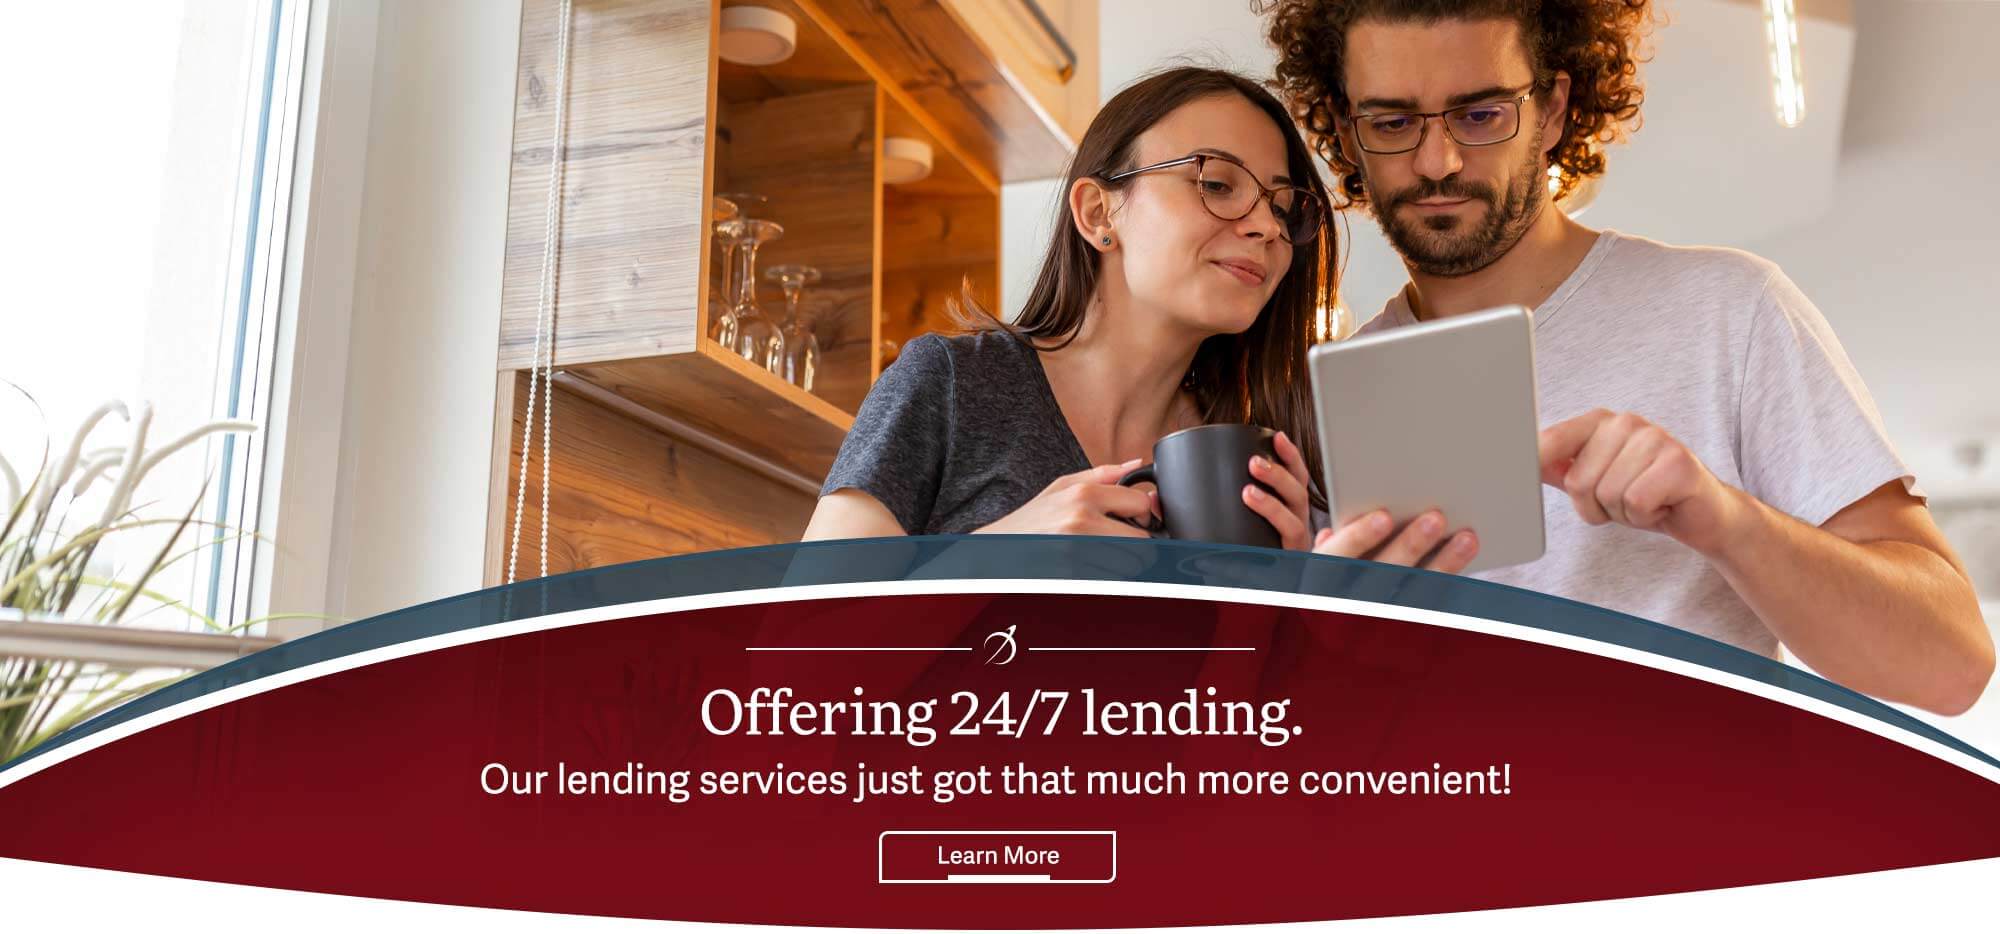 Offering 24/7 Lending. Our lending services just got that much more convenient! - Learn More